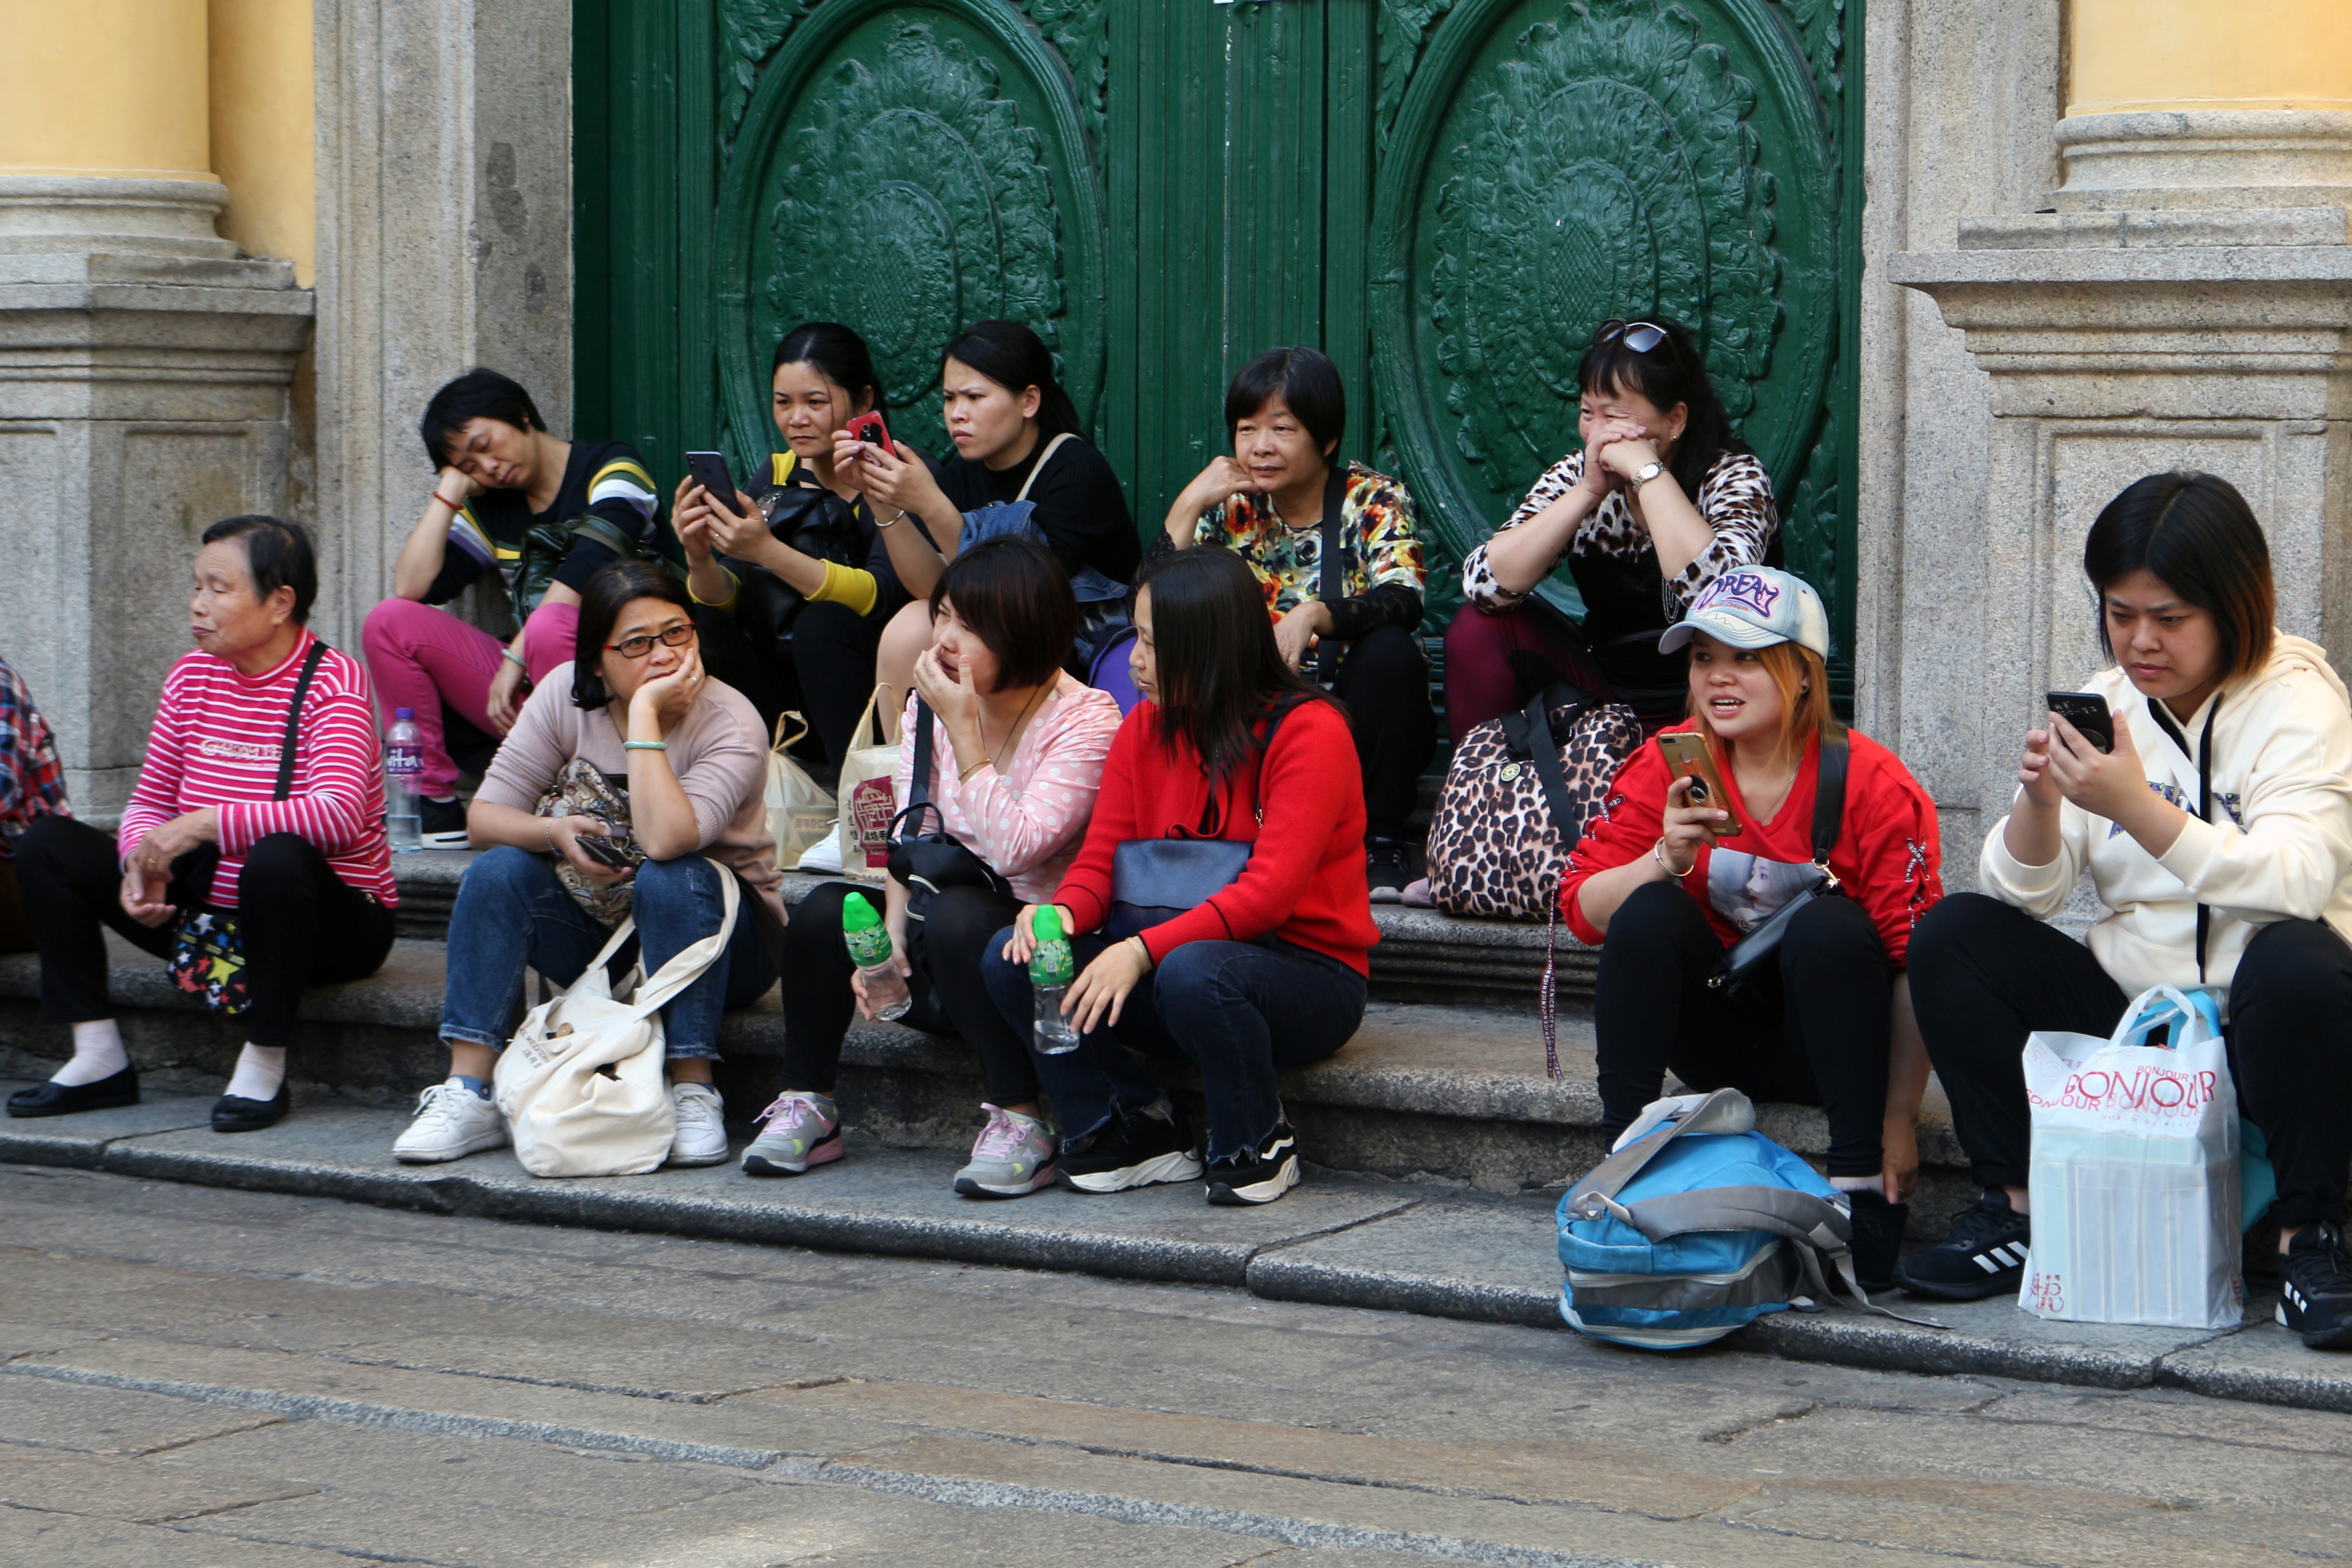 Tourist arrivals cross 534,000 as Chinese tourists continue to increase